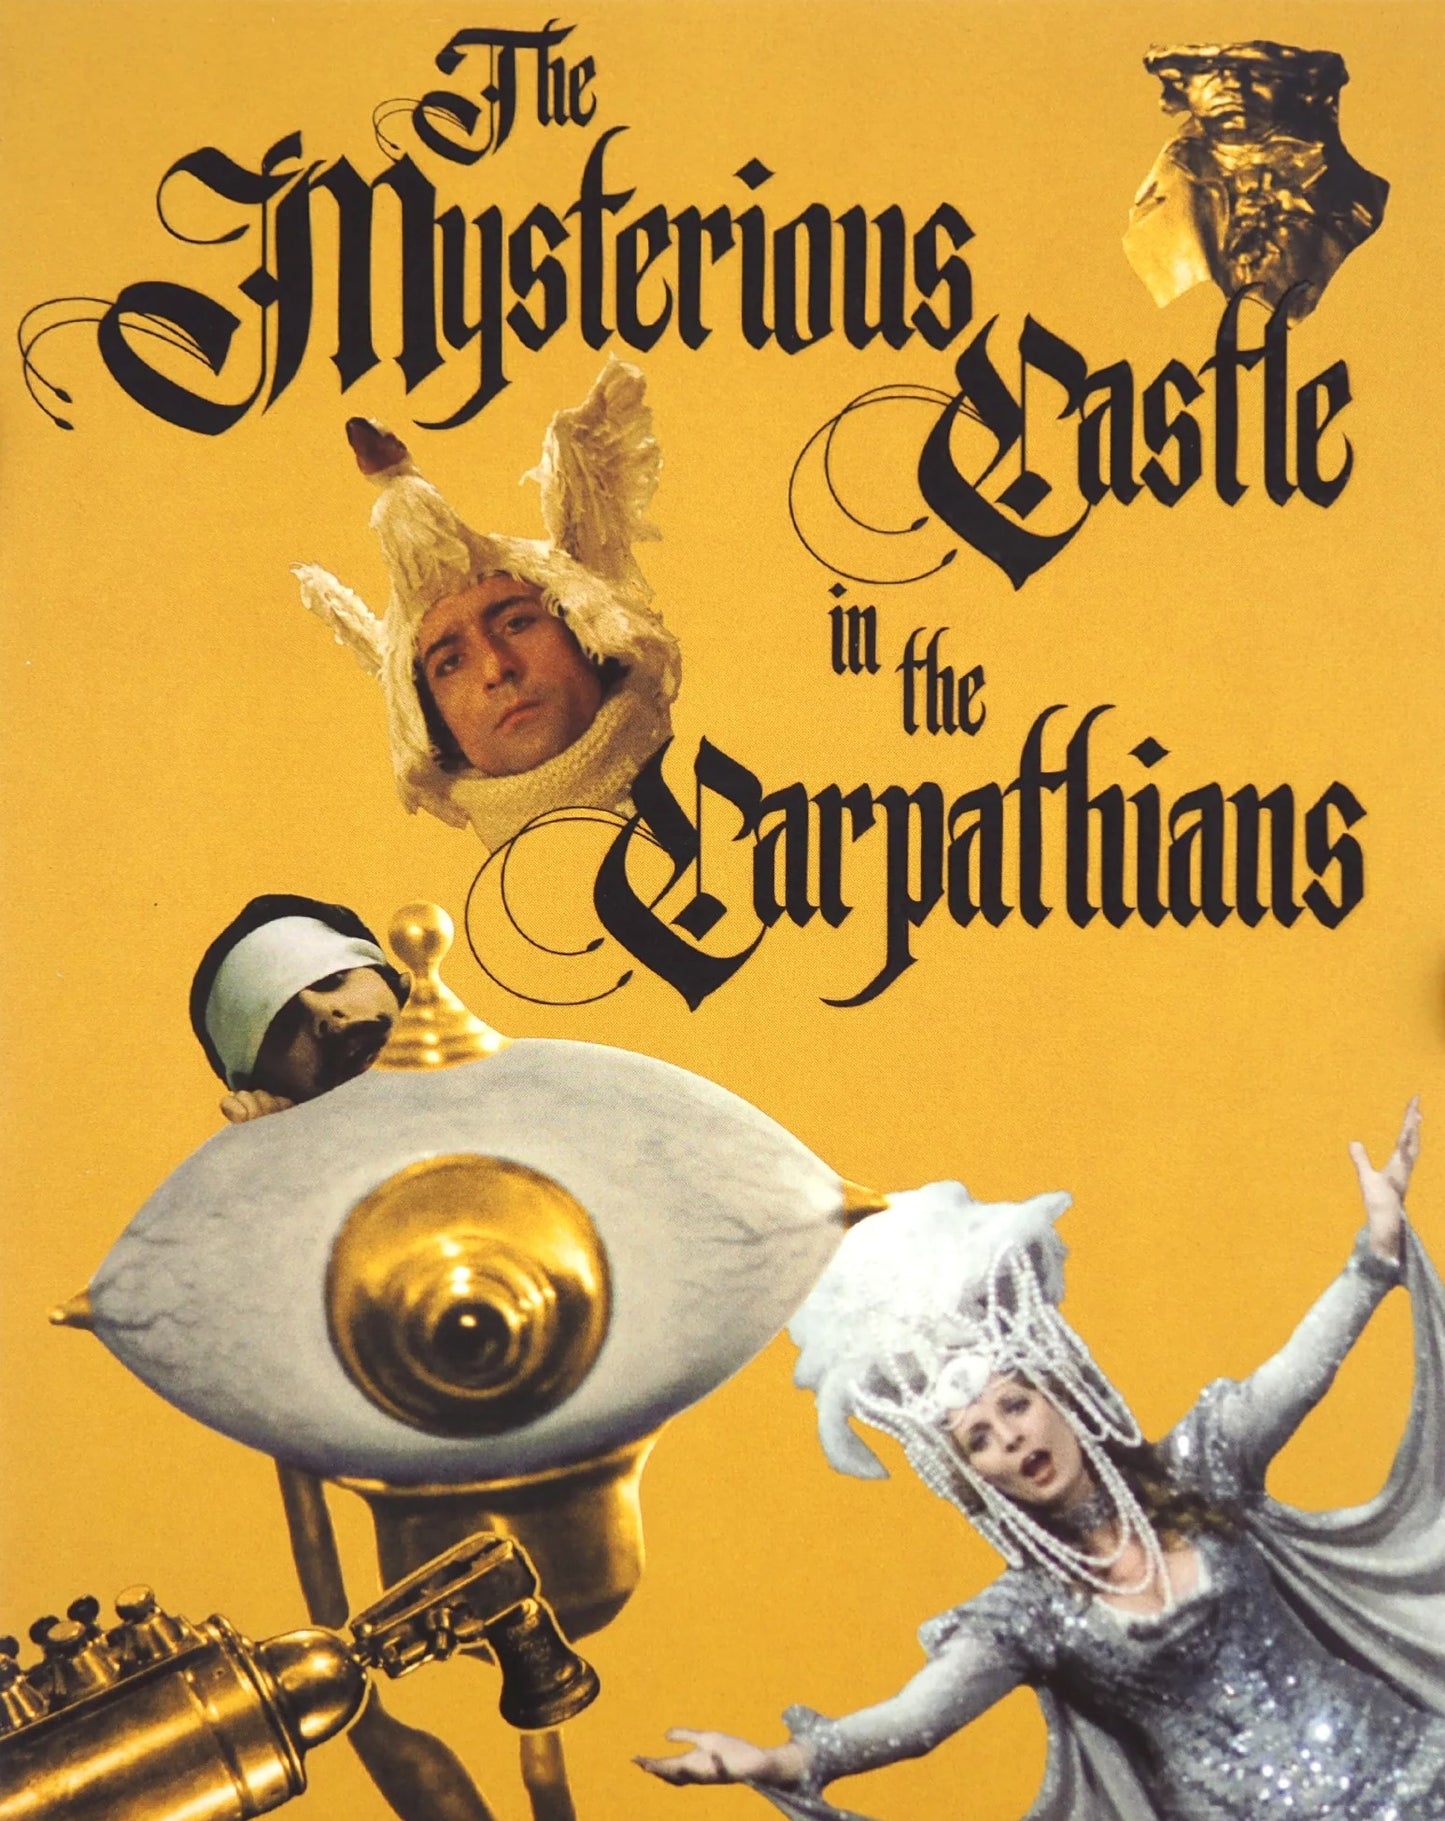 The Mysterious Castle in the Carpathians Limited Edition Deaf Crocodile Blu-Ray [NEW] [SLIPCOVER]